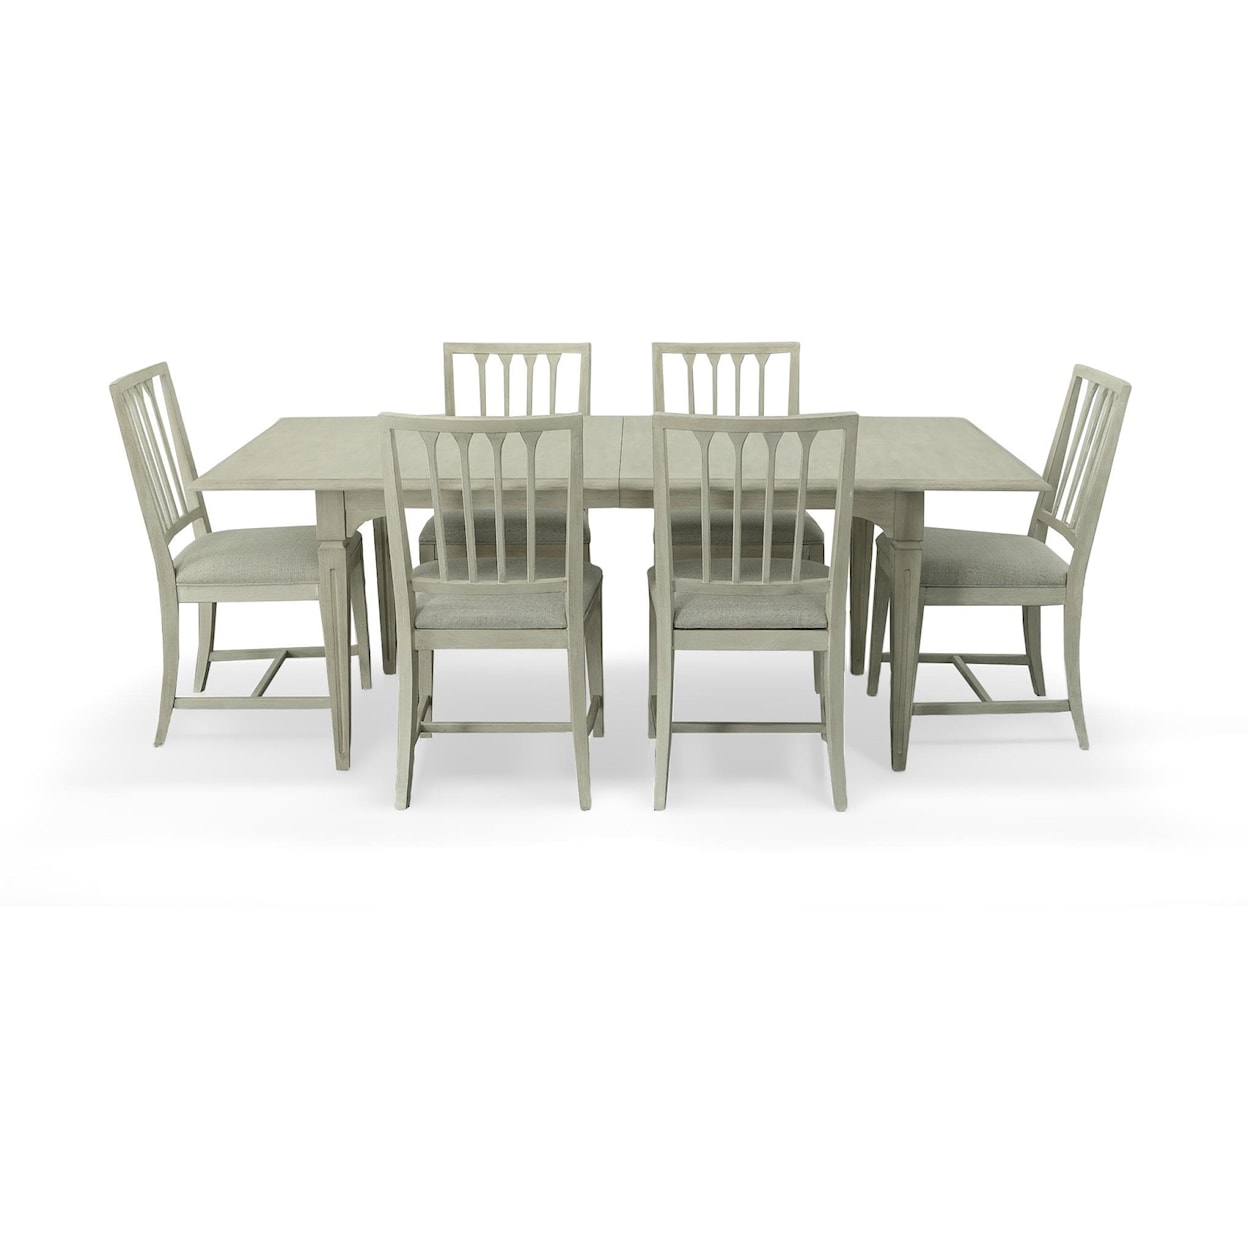 Universal PastForward Table and 6 Chairs Dining Set